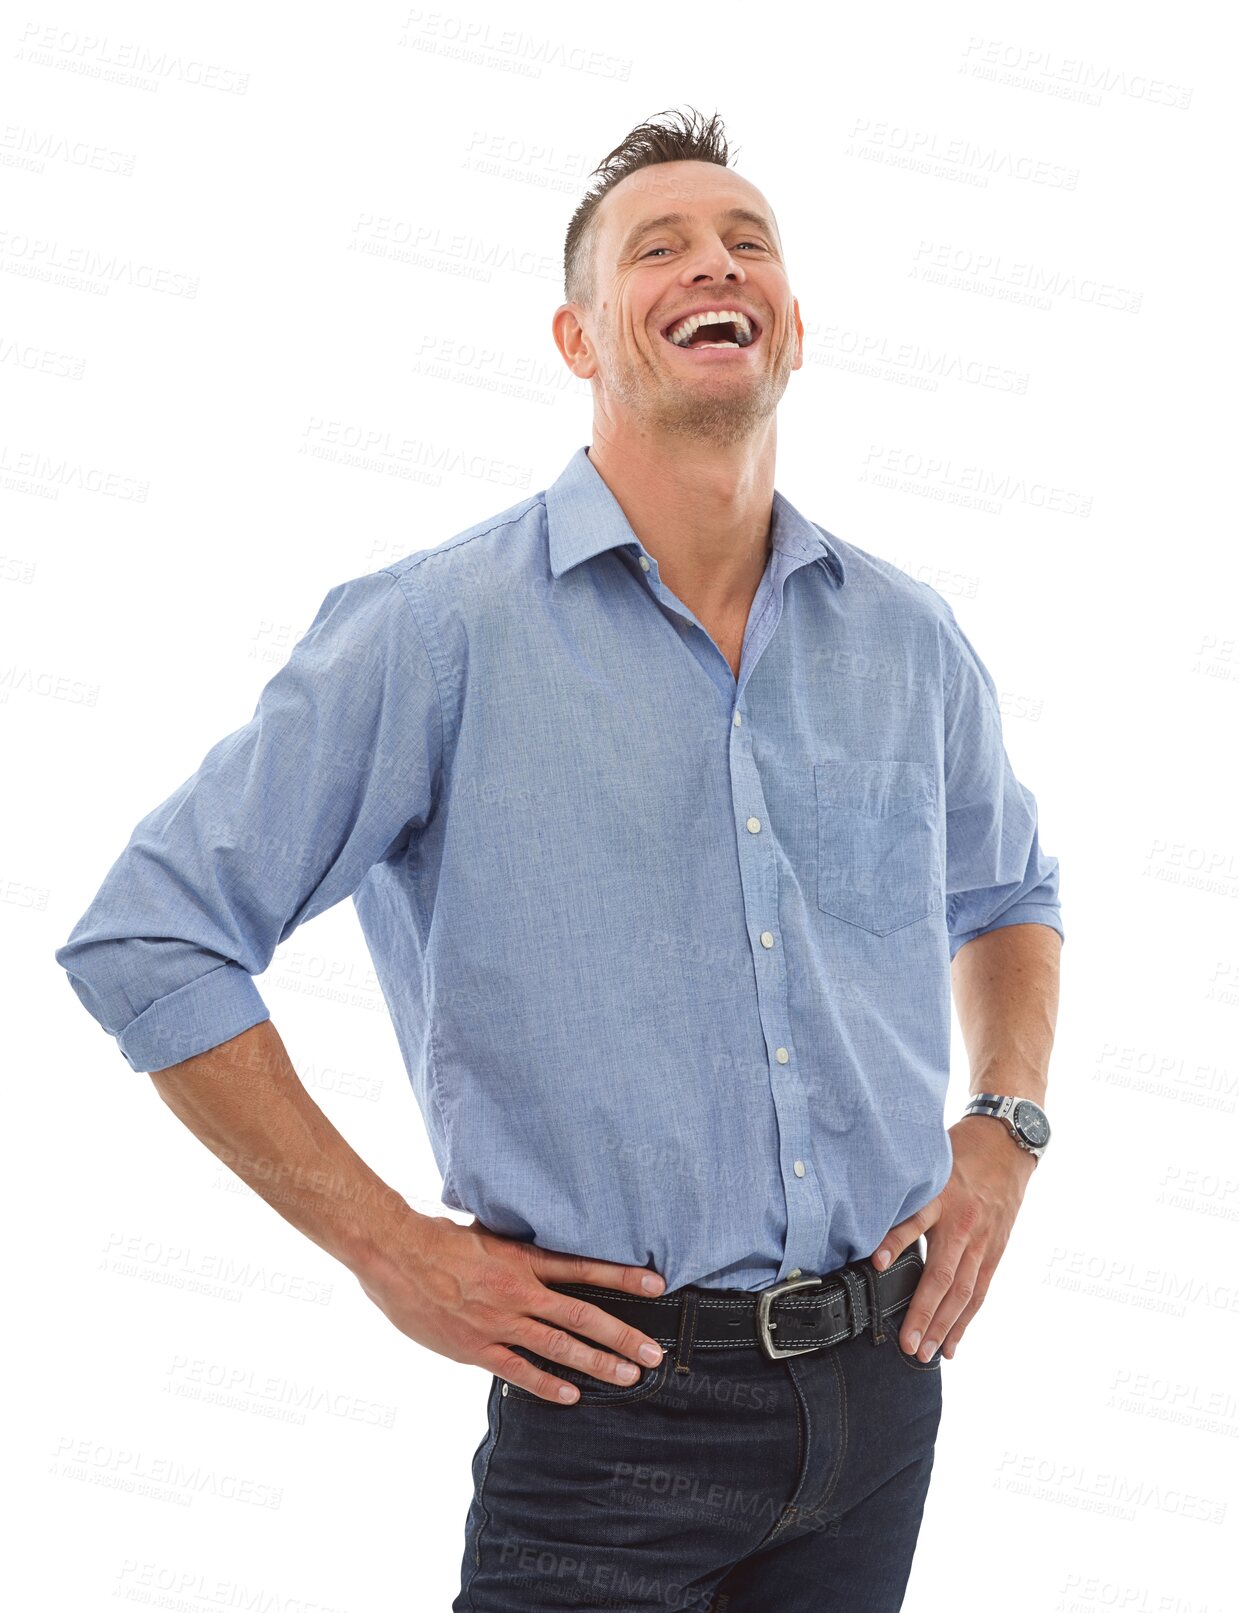 Buy stock photo Smile, laughing or portrait of happy businessman smiling isolated on transparent png background. Smile, positive mindset or mature person enjoying a funny joke, humor or comedy with hands on hips